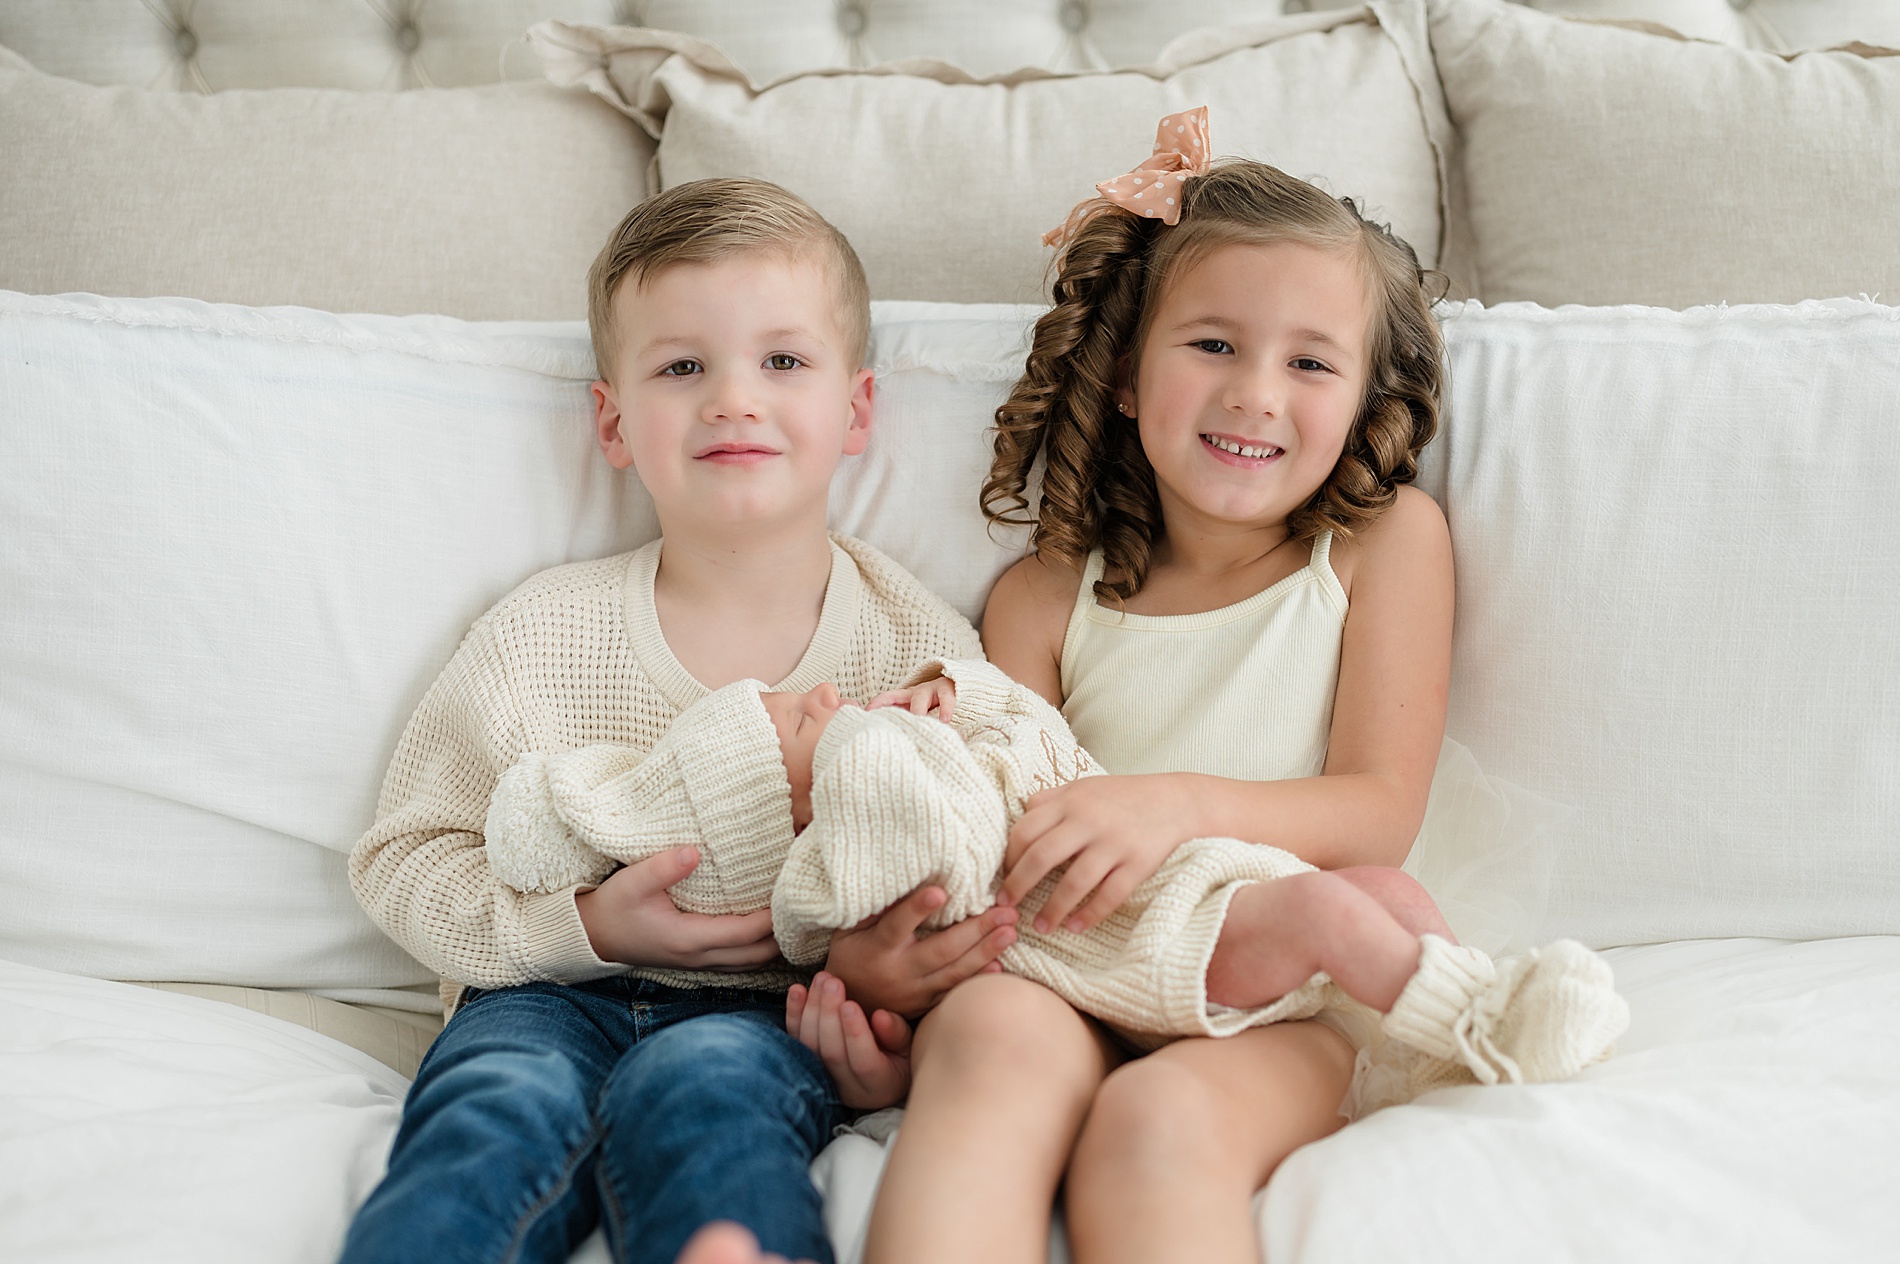 timeless portraits of siblings holder their baby brother taken by Lindsey Dutton Photography, a Dallas newborn photographer
